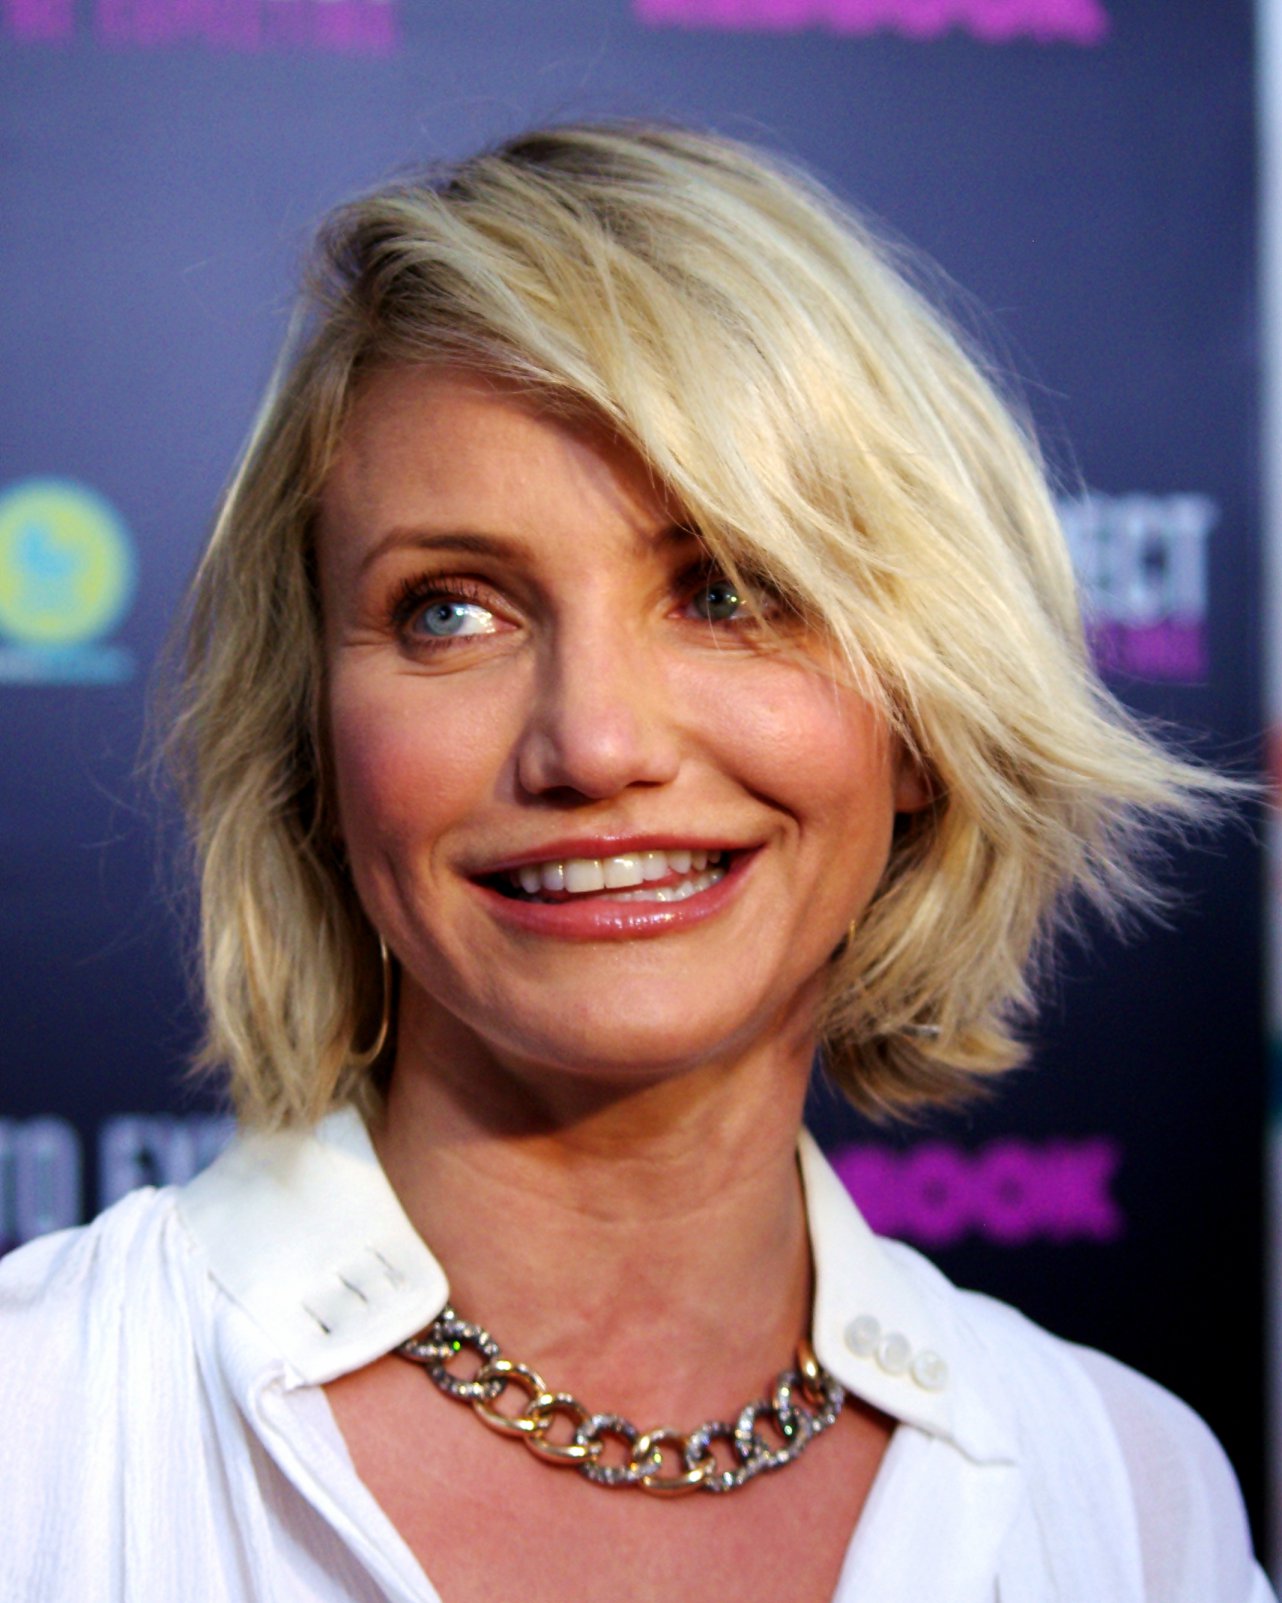 Cameron Diaz used to buy weed from Snoop Dogg back in high school, long before either of them were famous.